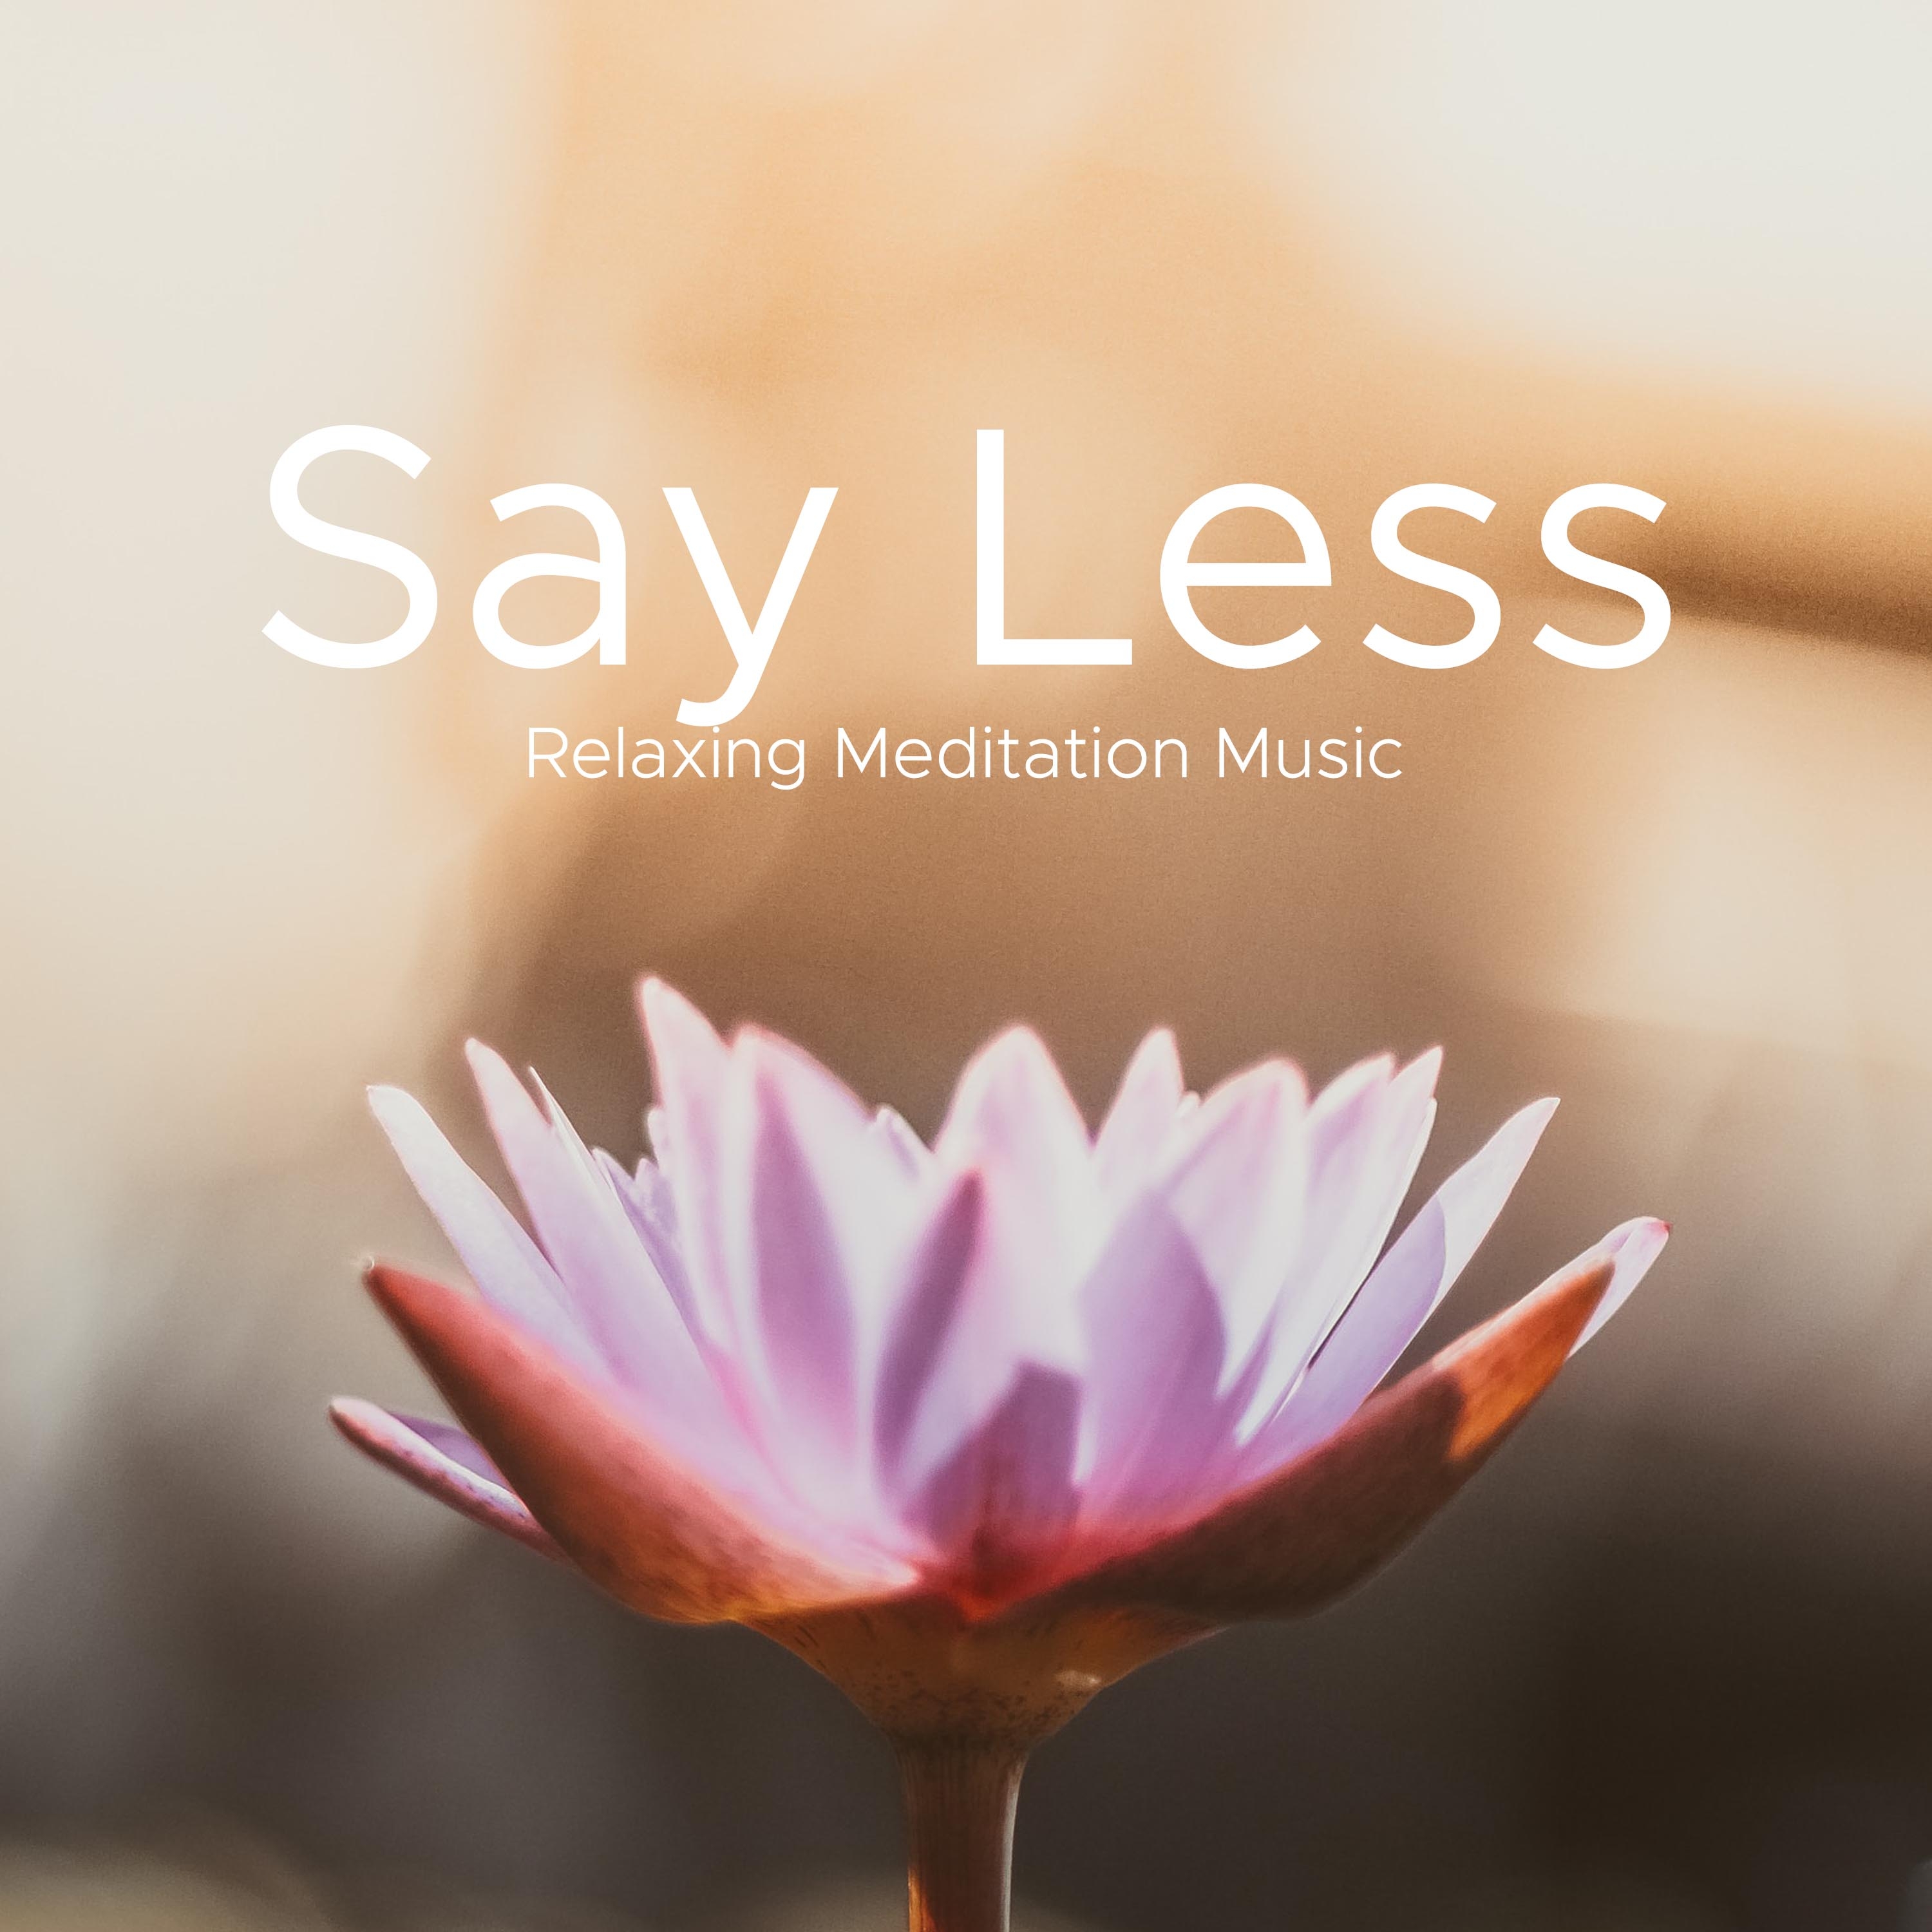 Say Less - Relaxing Meditation Music, Nature Sounds, Take Time to Destress, Calm your Mind and Body